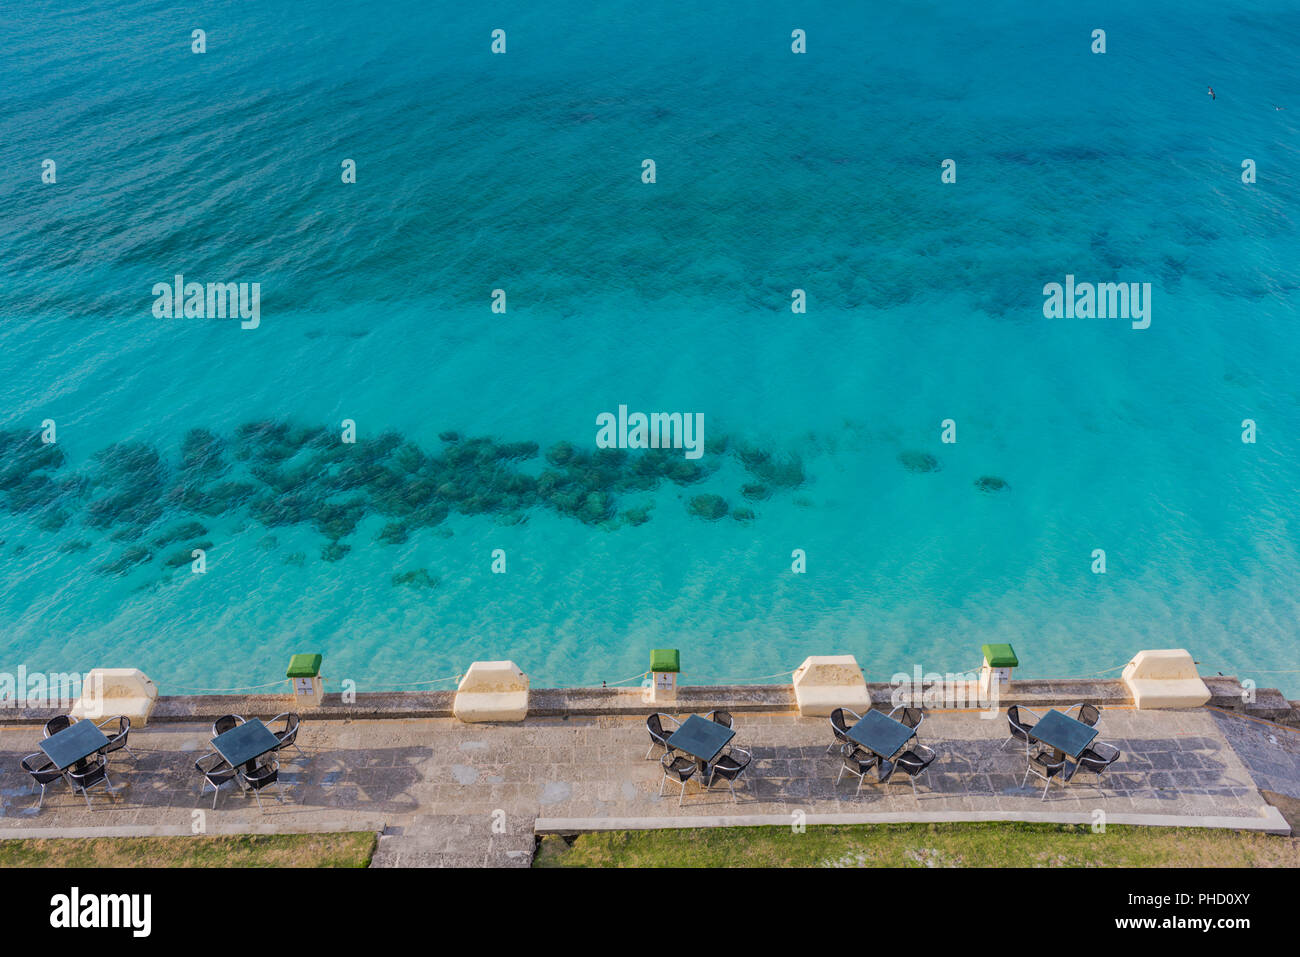 Row of bistro tables on patio by translucent turquoise ocean in Varadero, Cuba. Stock Photo